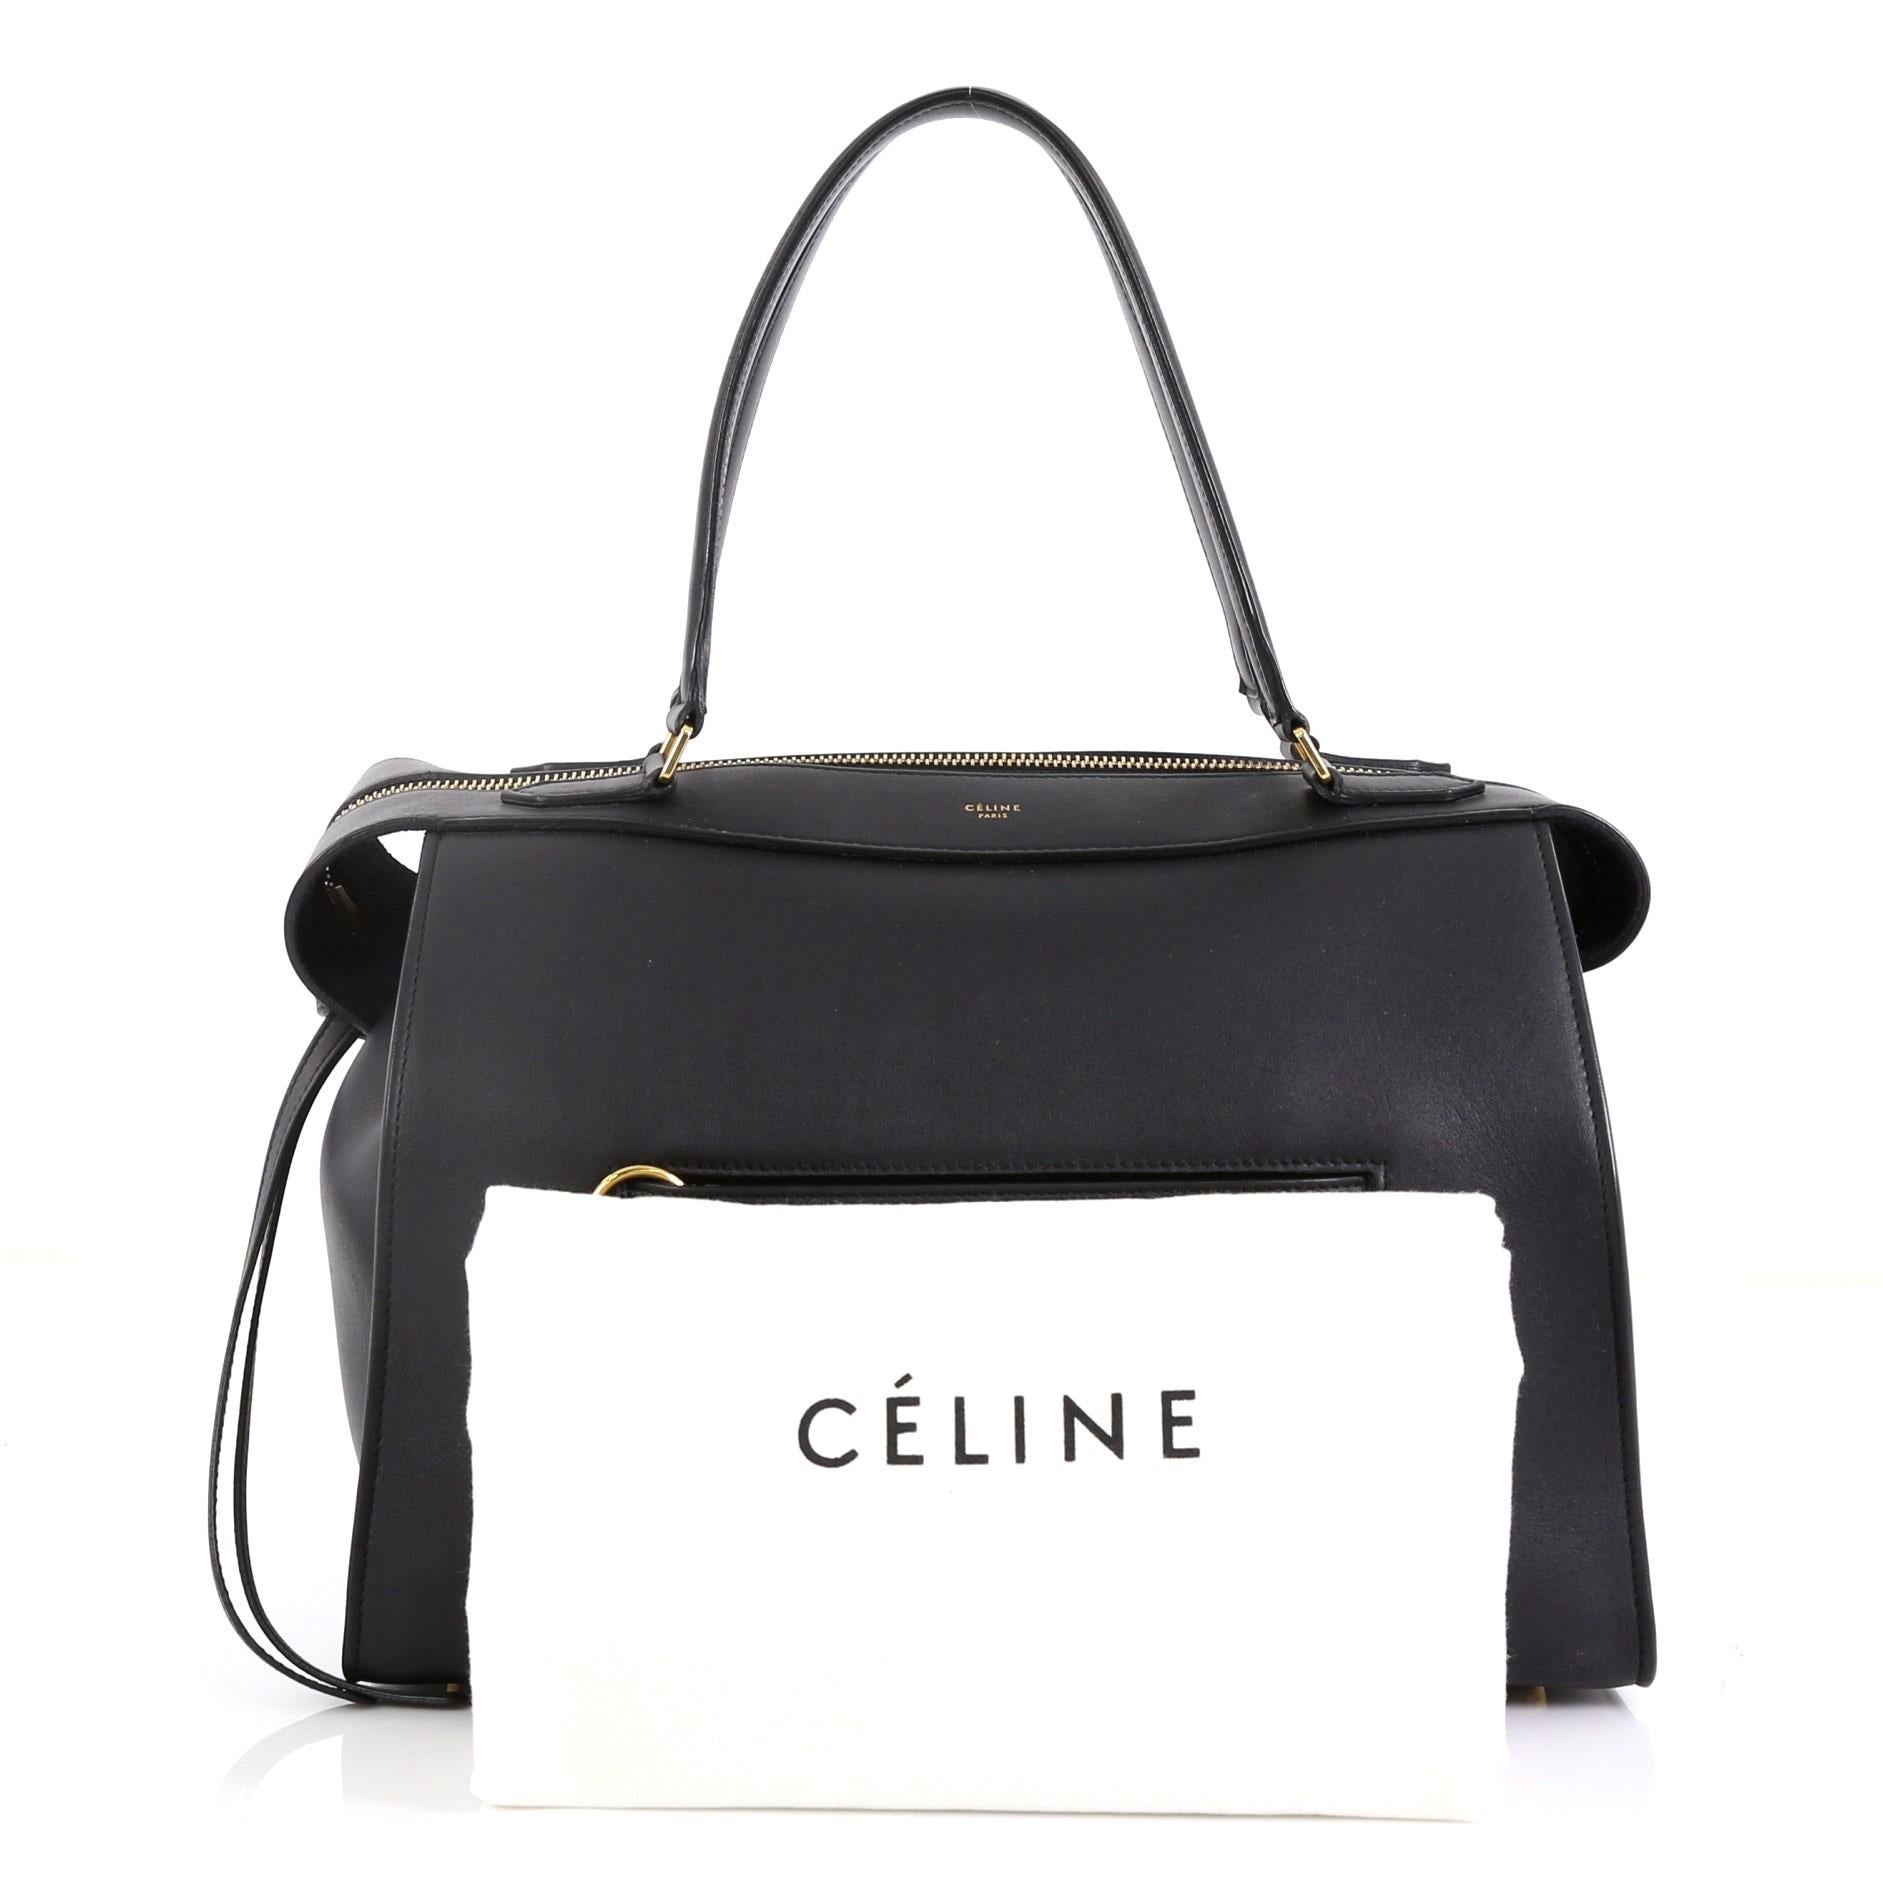 This Celine Ring Bag Leather Small, crafted in black leather, features a soft-structured silhouette, tall leather handles, ring accents on its front pocket, gold-stamped Celine logo, and gold-tone hardware. Its top zip closure opens to a black suede